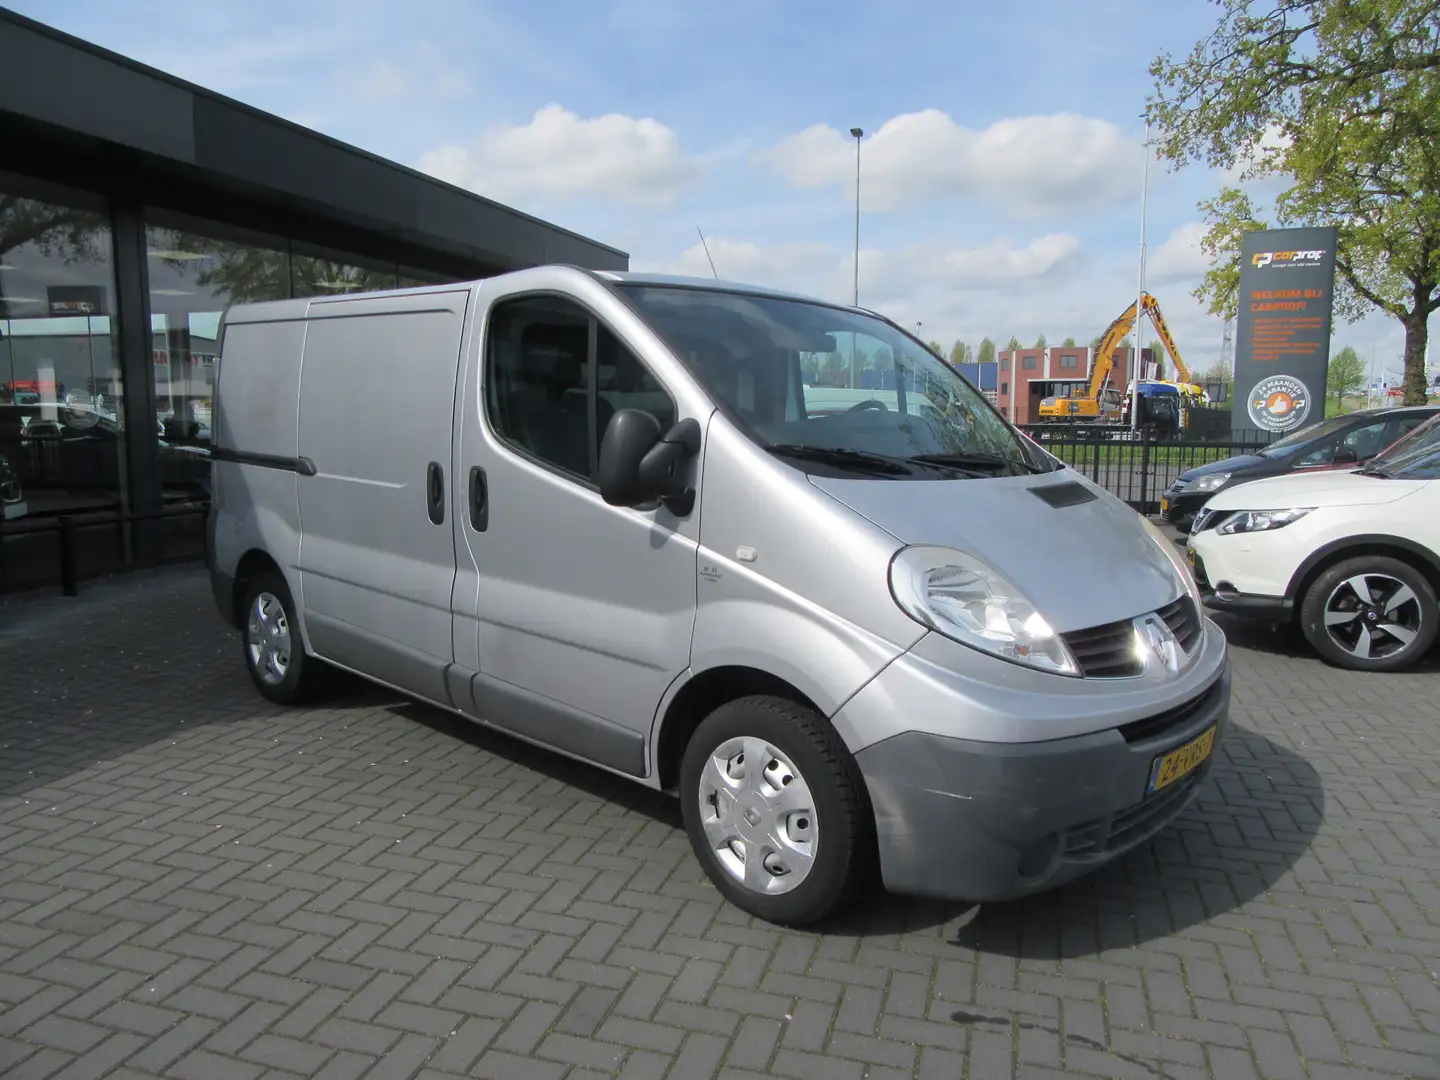 Renault Trafic 2.0 dCi T27 L1H1 Airco, Navi, Cruise Control, 2 sc Argent - 2